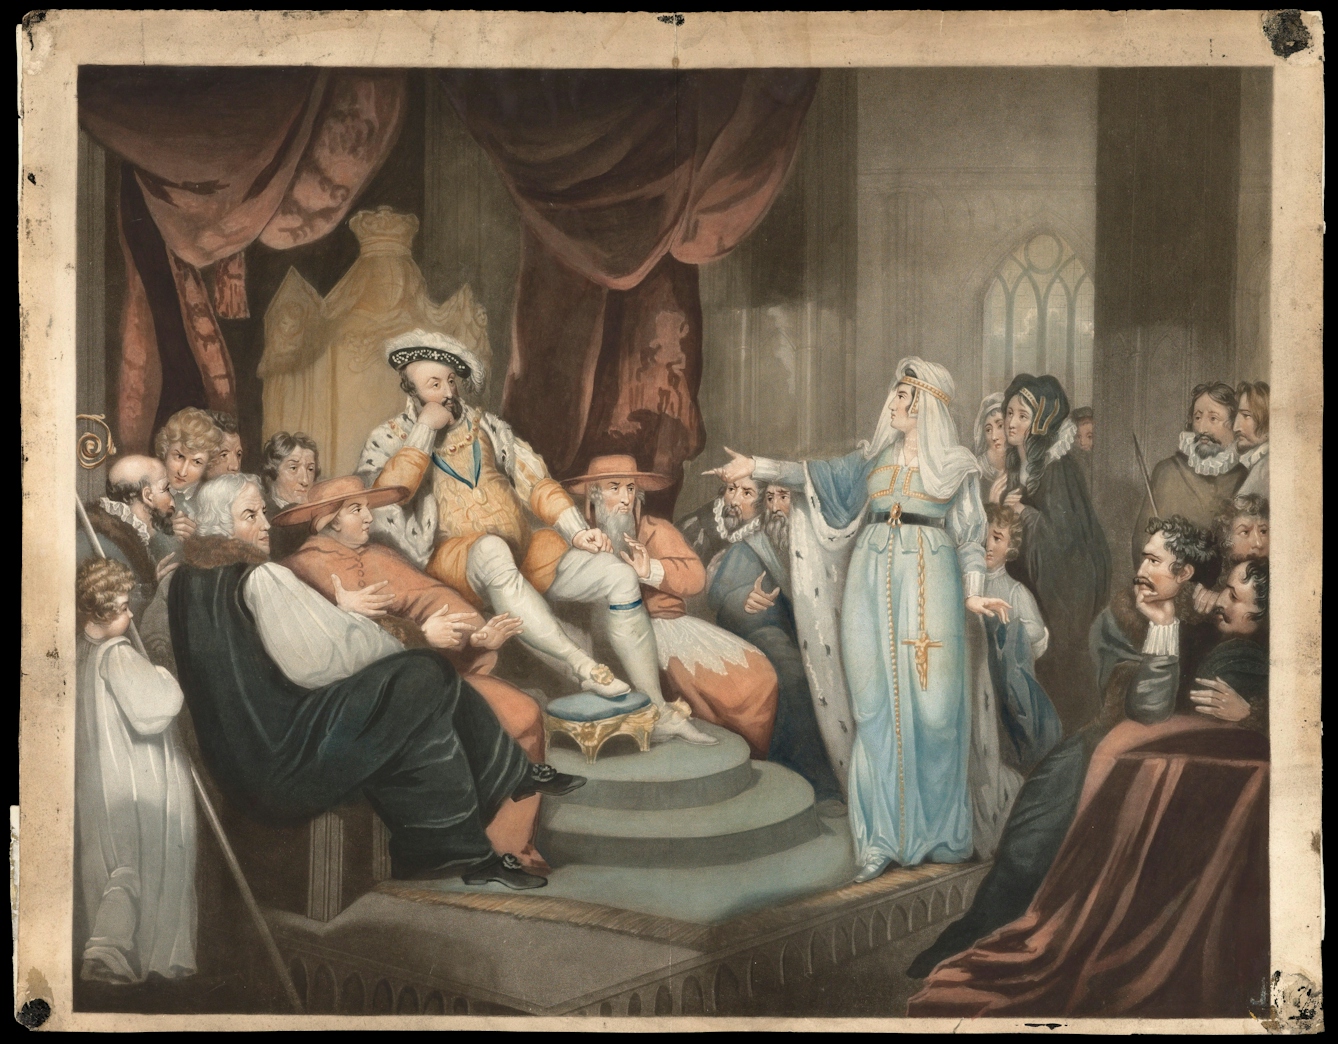 Coloured mezzotint showing Catharine of Aragon pleading her cause before King Henry VIII. Her right arm is outstretched to the King, who is leaning back on his throne. The room is crowded with anxious spectators. 